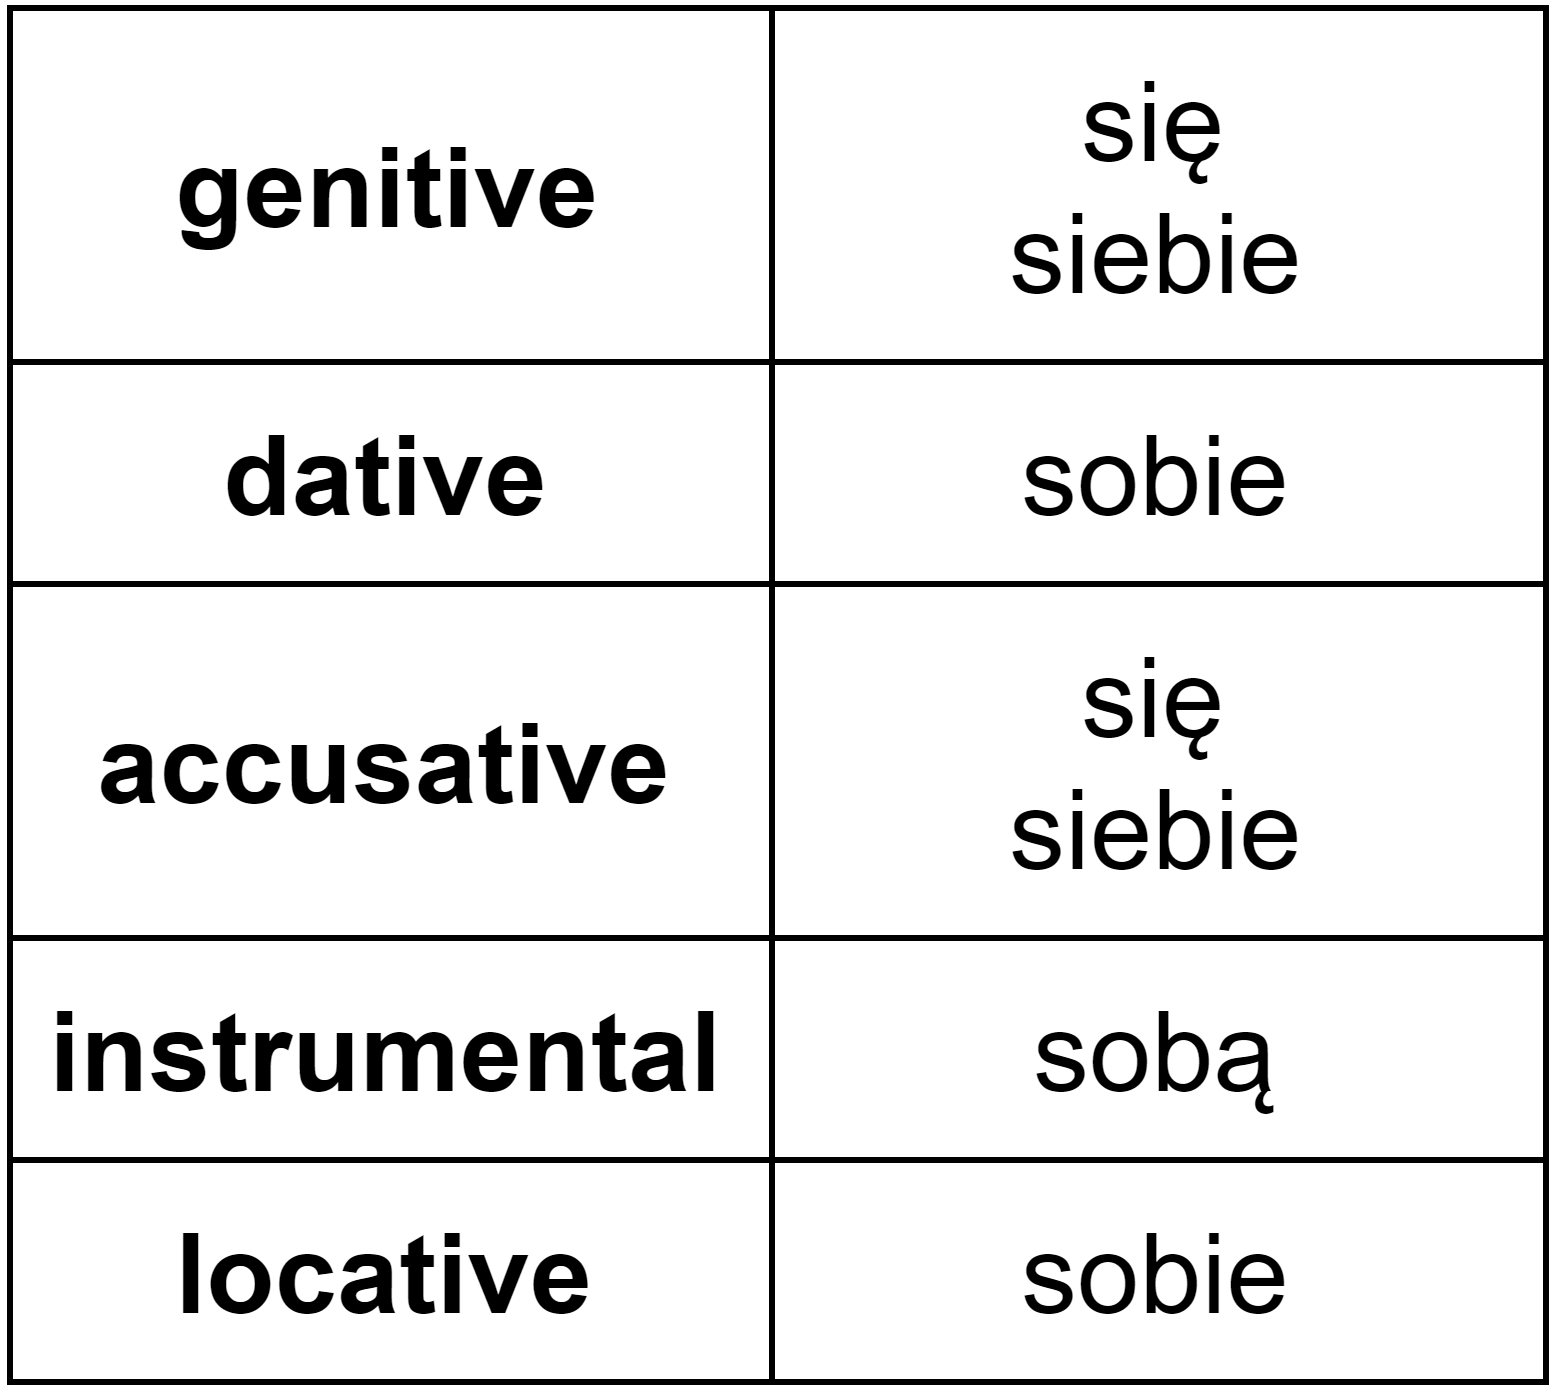 Declension of “się” (Polish reflexive pronouns in all grammatical cases)